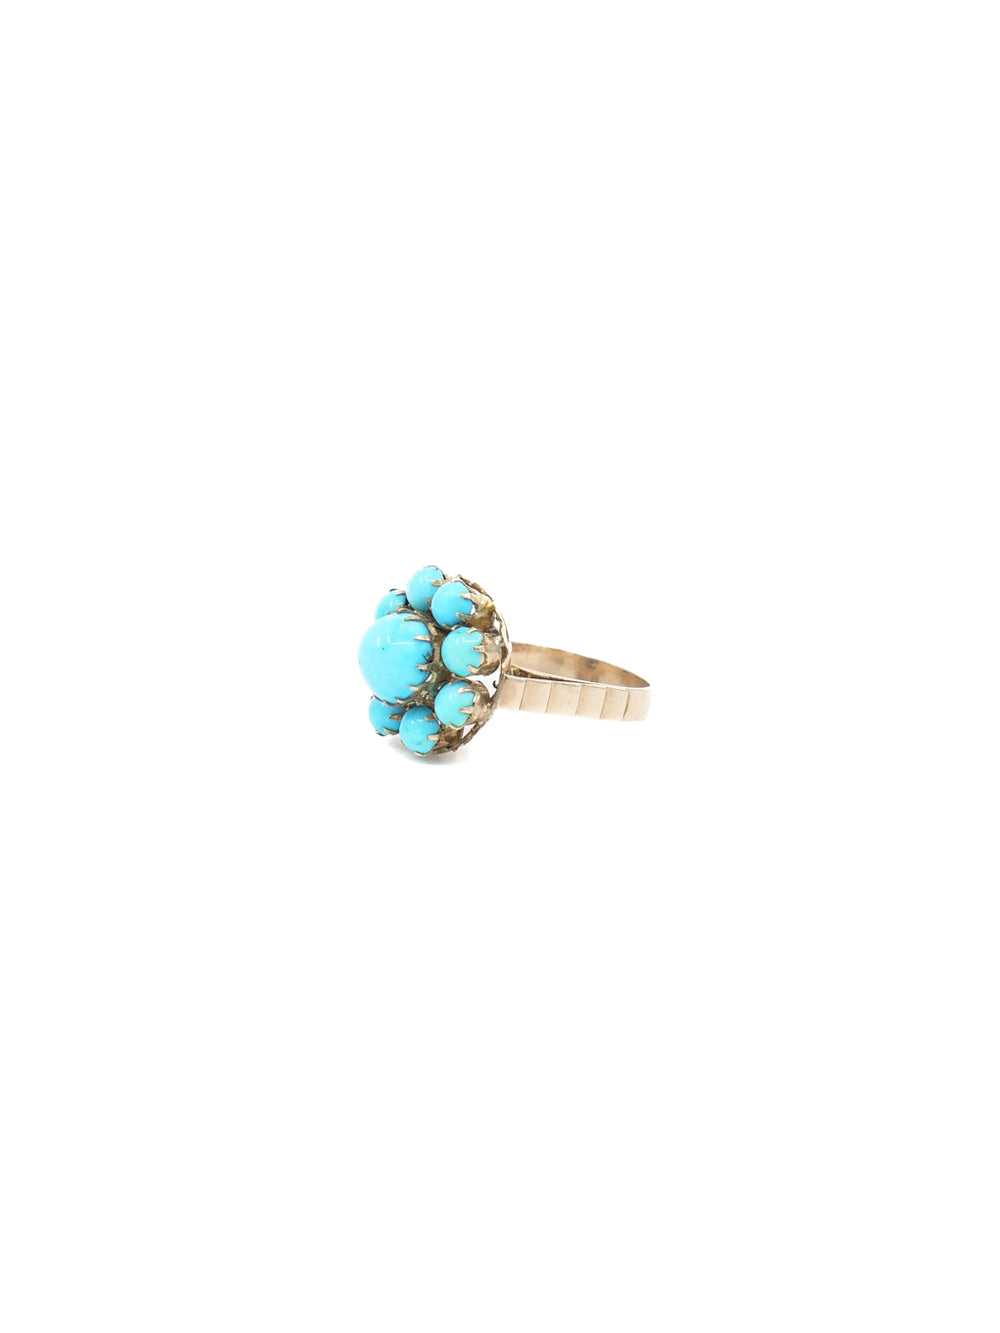 14K Turquoise Floral Cabochon Ring - image 3